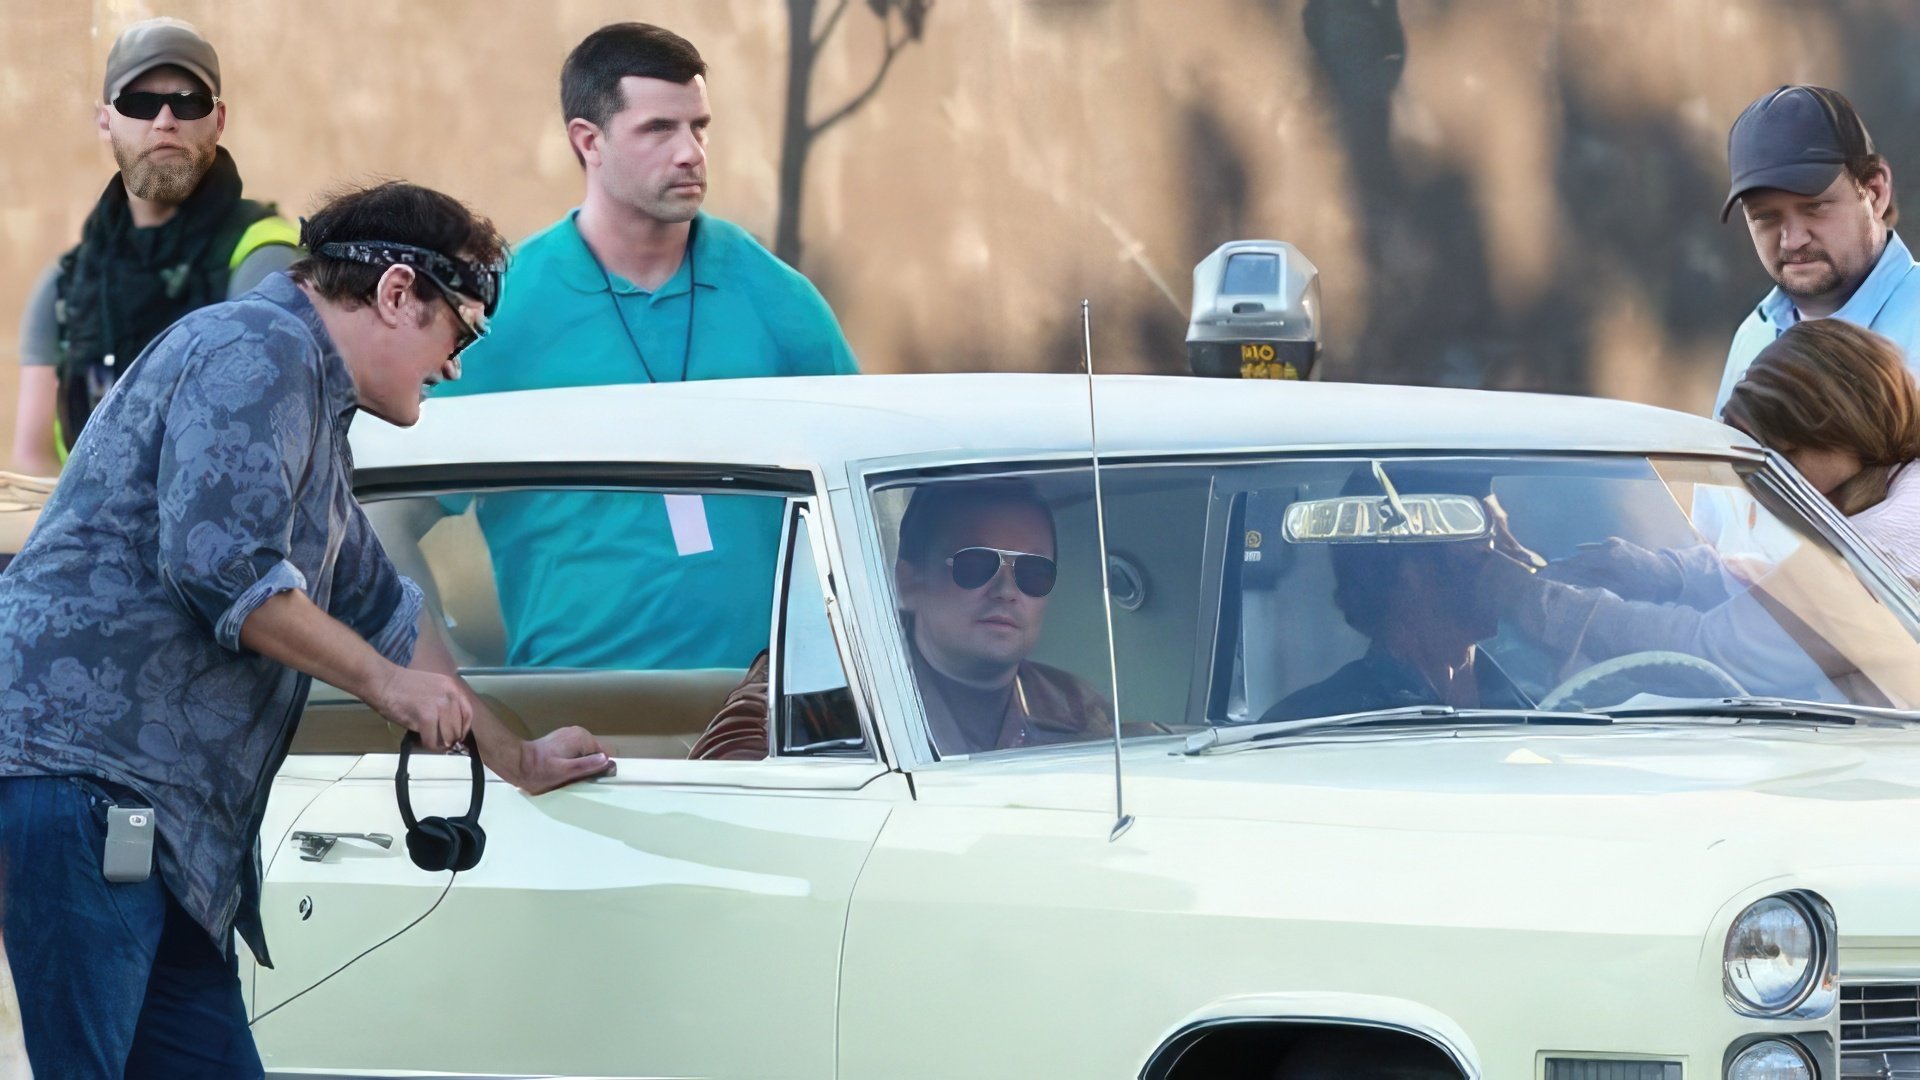 On the set of 'Once Upon a Time in Hollywood'